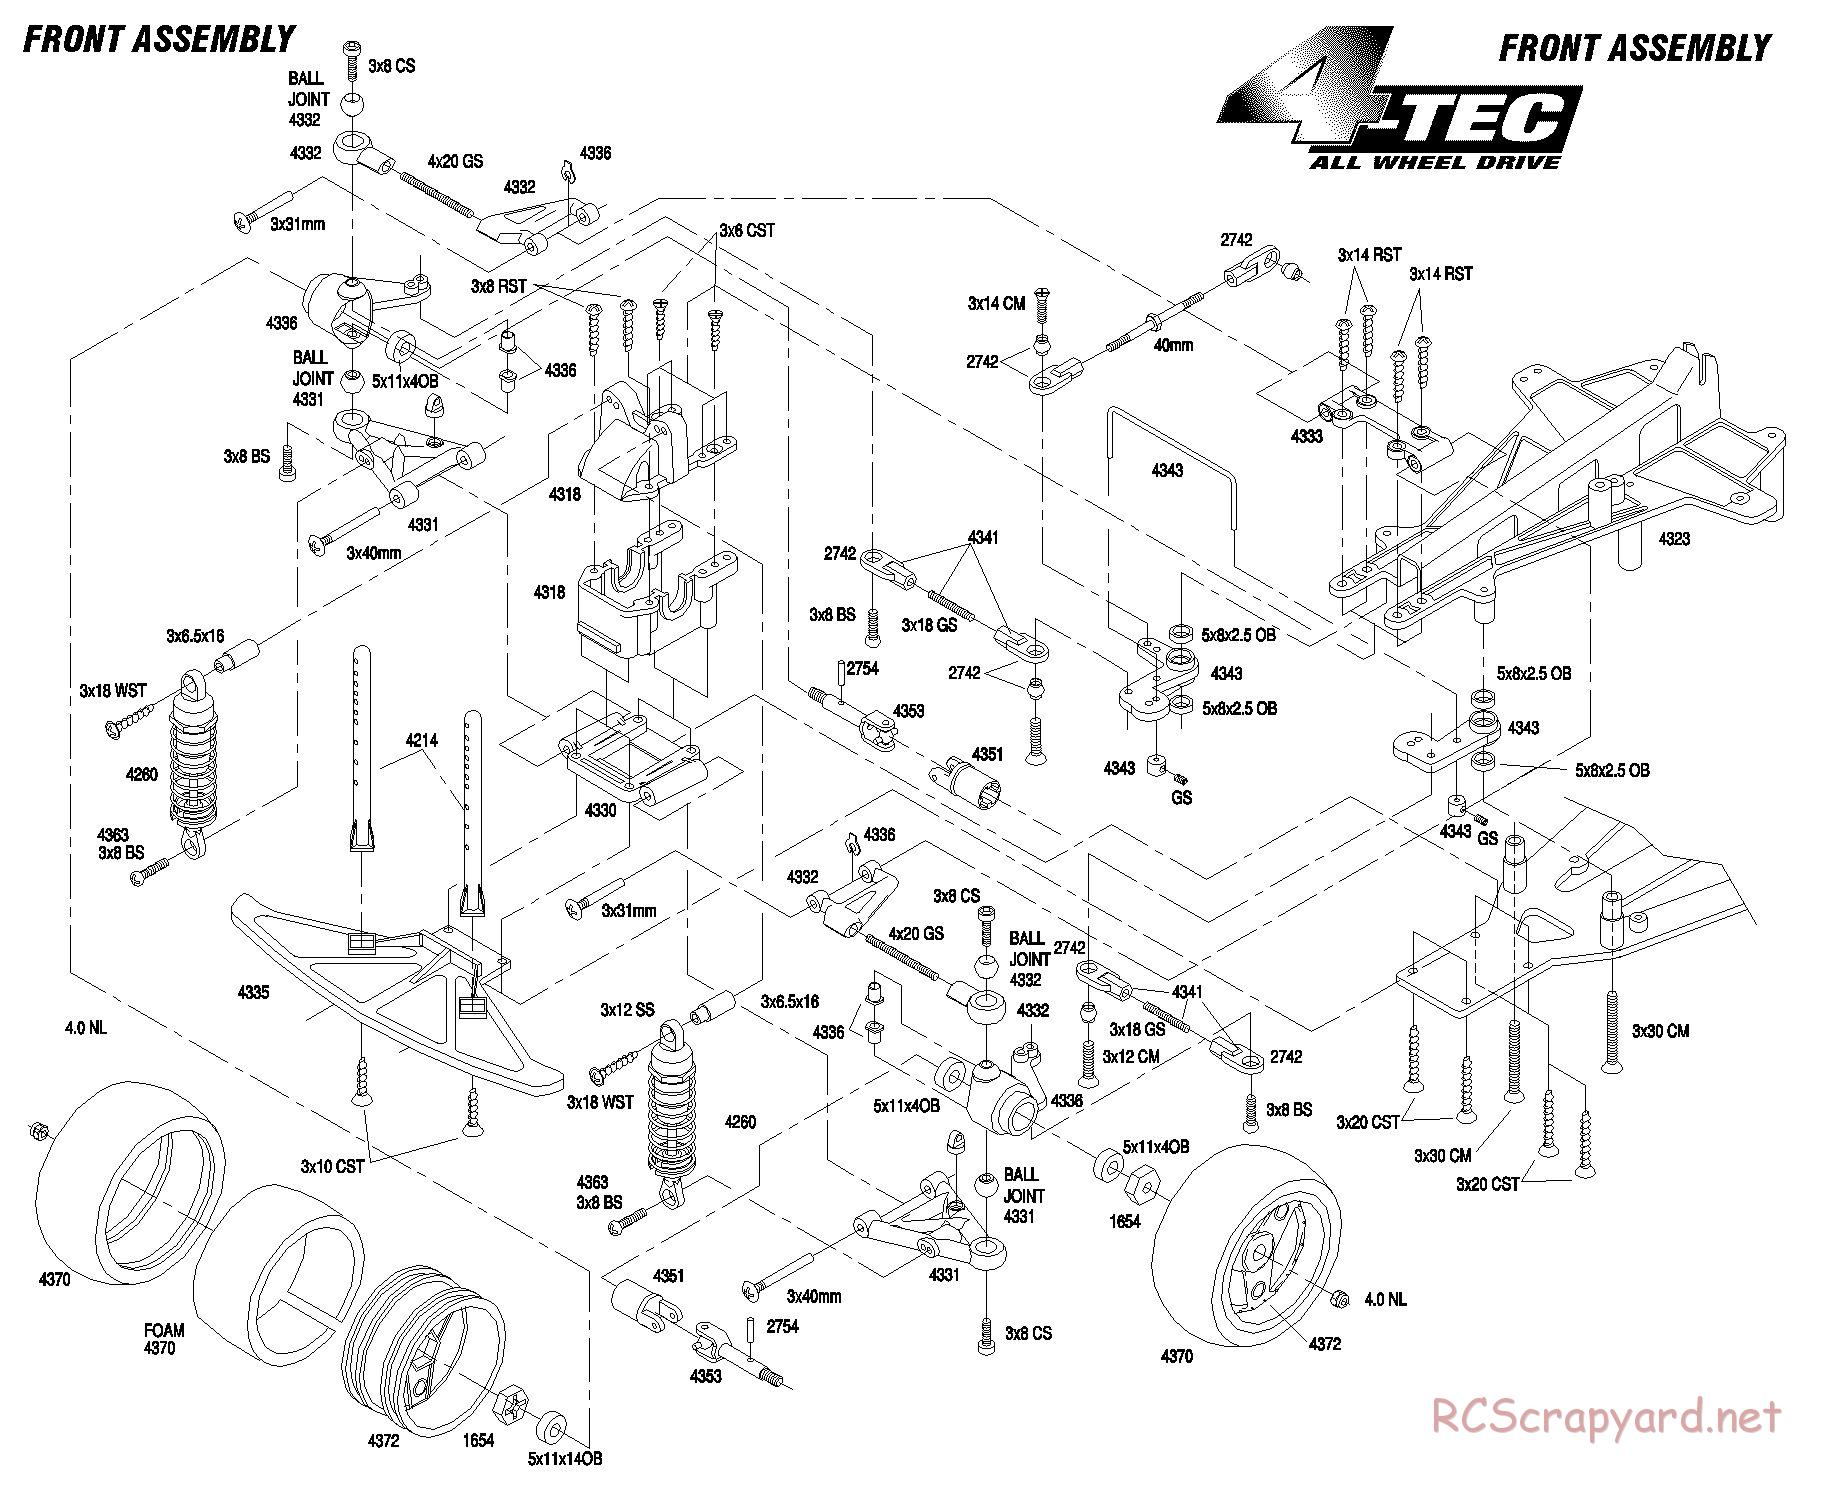 Traxxas - 4-Tec (1998) - Exploded Views - Page 1